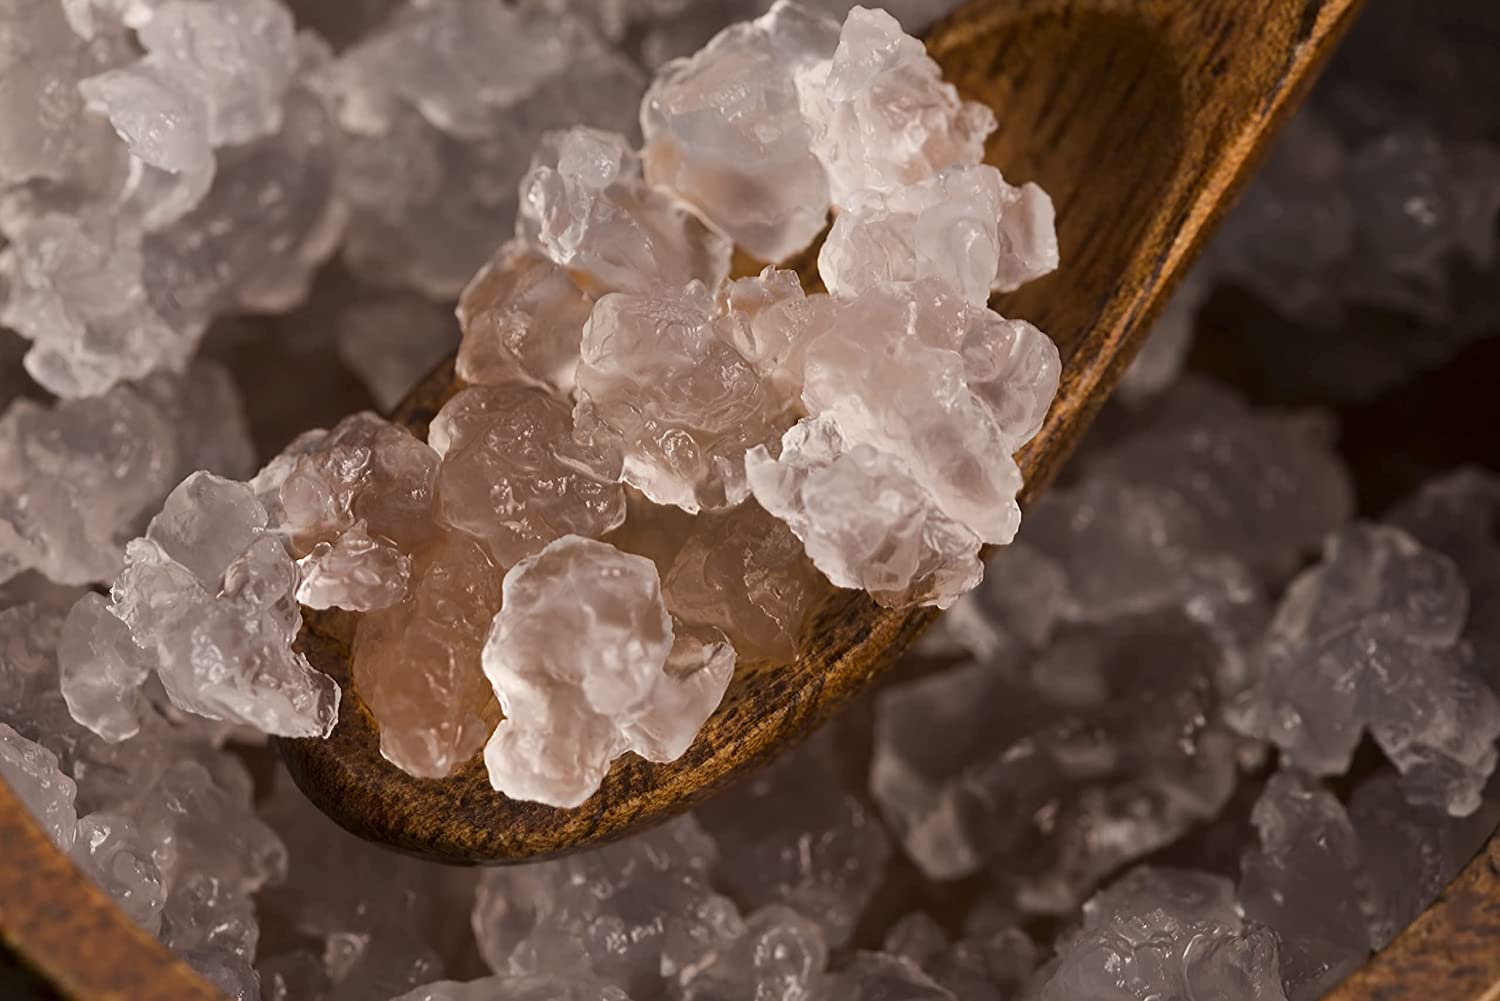 DISCONTINUED - Water Kefir Grains - Genuine, Dried - hydrates to 1/4 cup